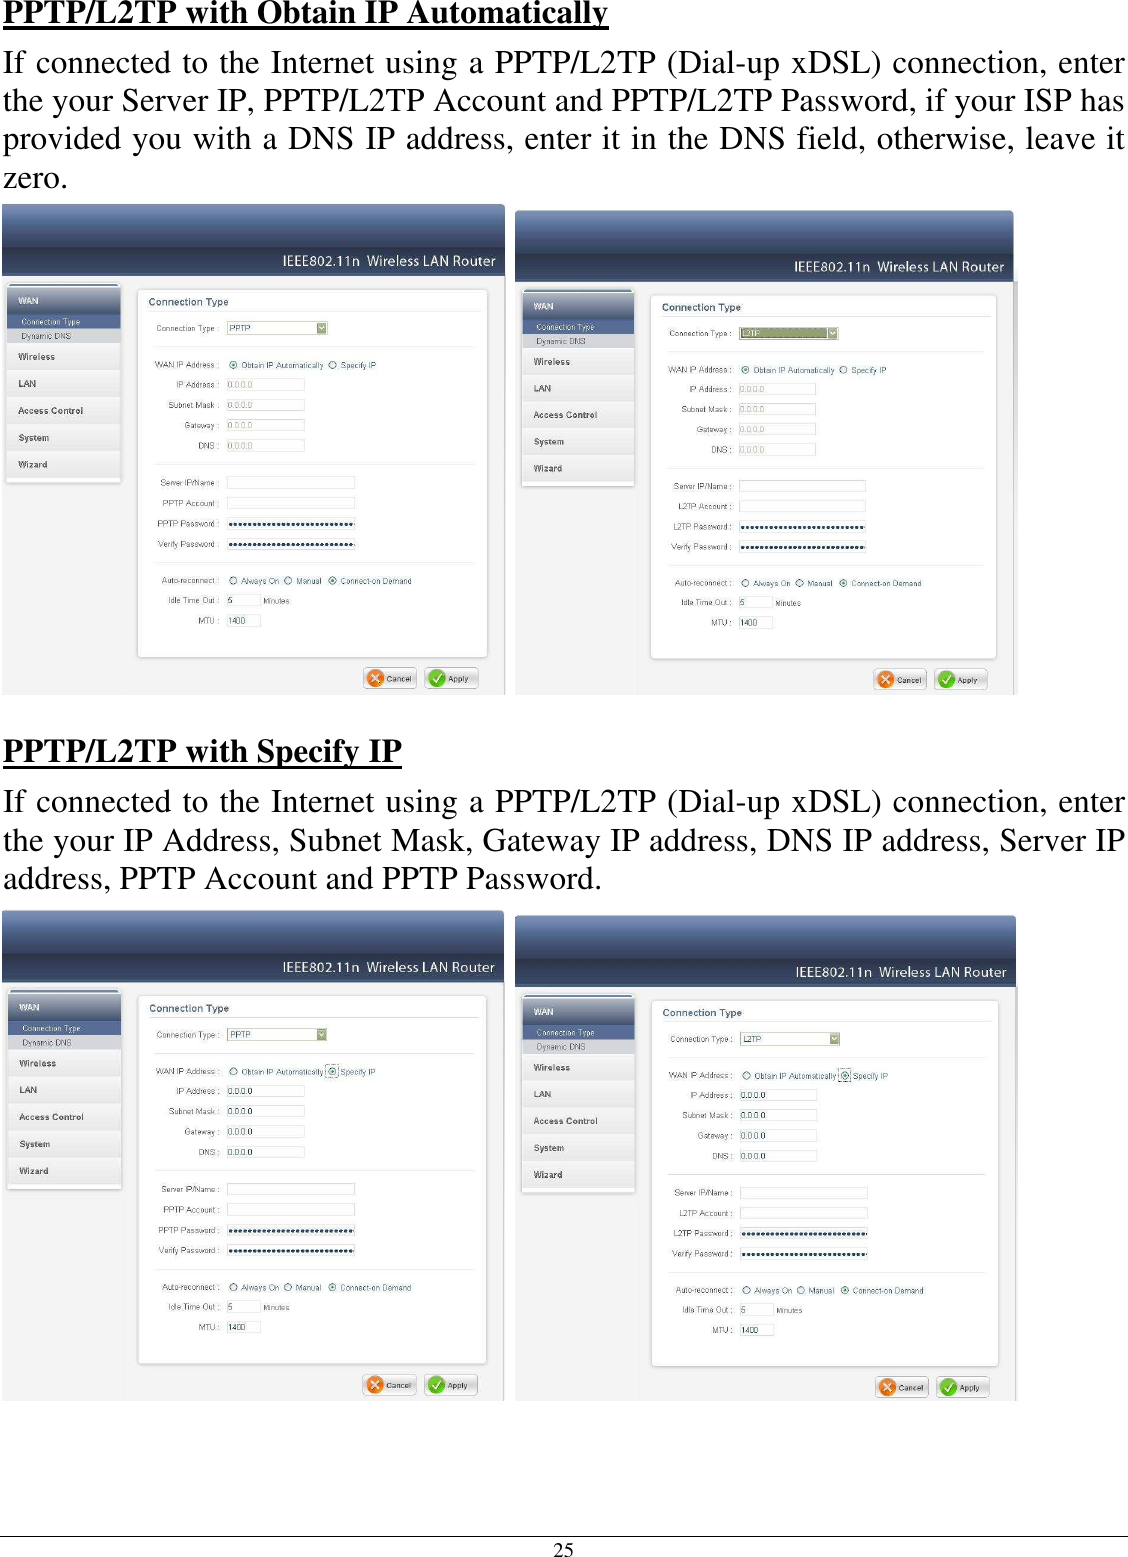 25 PPTP/L2TP with Obtain IP Automatically If connected to the Internet using a PPTP/L2TP (Dial-up xDSL) connection, enter the your Server IP, PPTP/L2TP Account and PPTP/L2TP Password, if your ISP has provided you with a DNS IP address, enter it in the DNS field, otherwise, leave it zero.      PPTP/L2TP with Specify IP If connected to the Internet using a PPTP/L2TP (Dial-up xDSL) connection, enter the your IP Address, Subnet Mask, Gateway IP address, DNS IP address, Server IP address, PPTP Account and PPTP Password.     